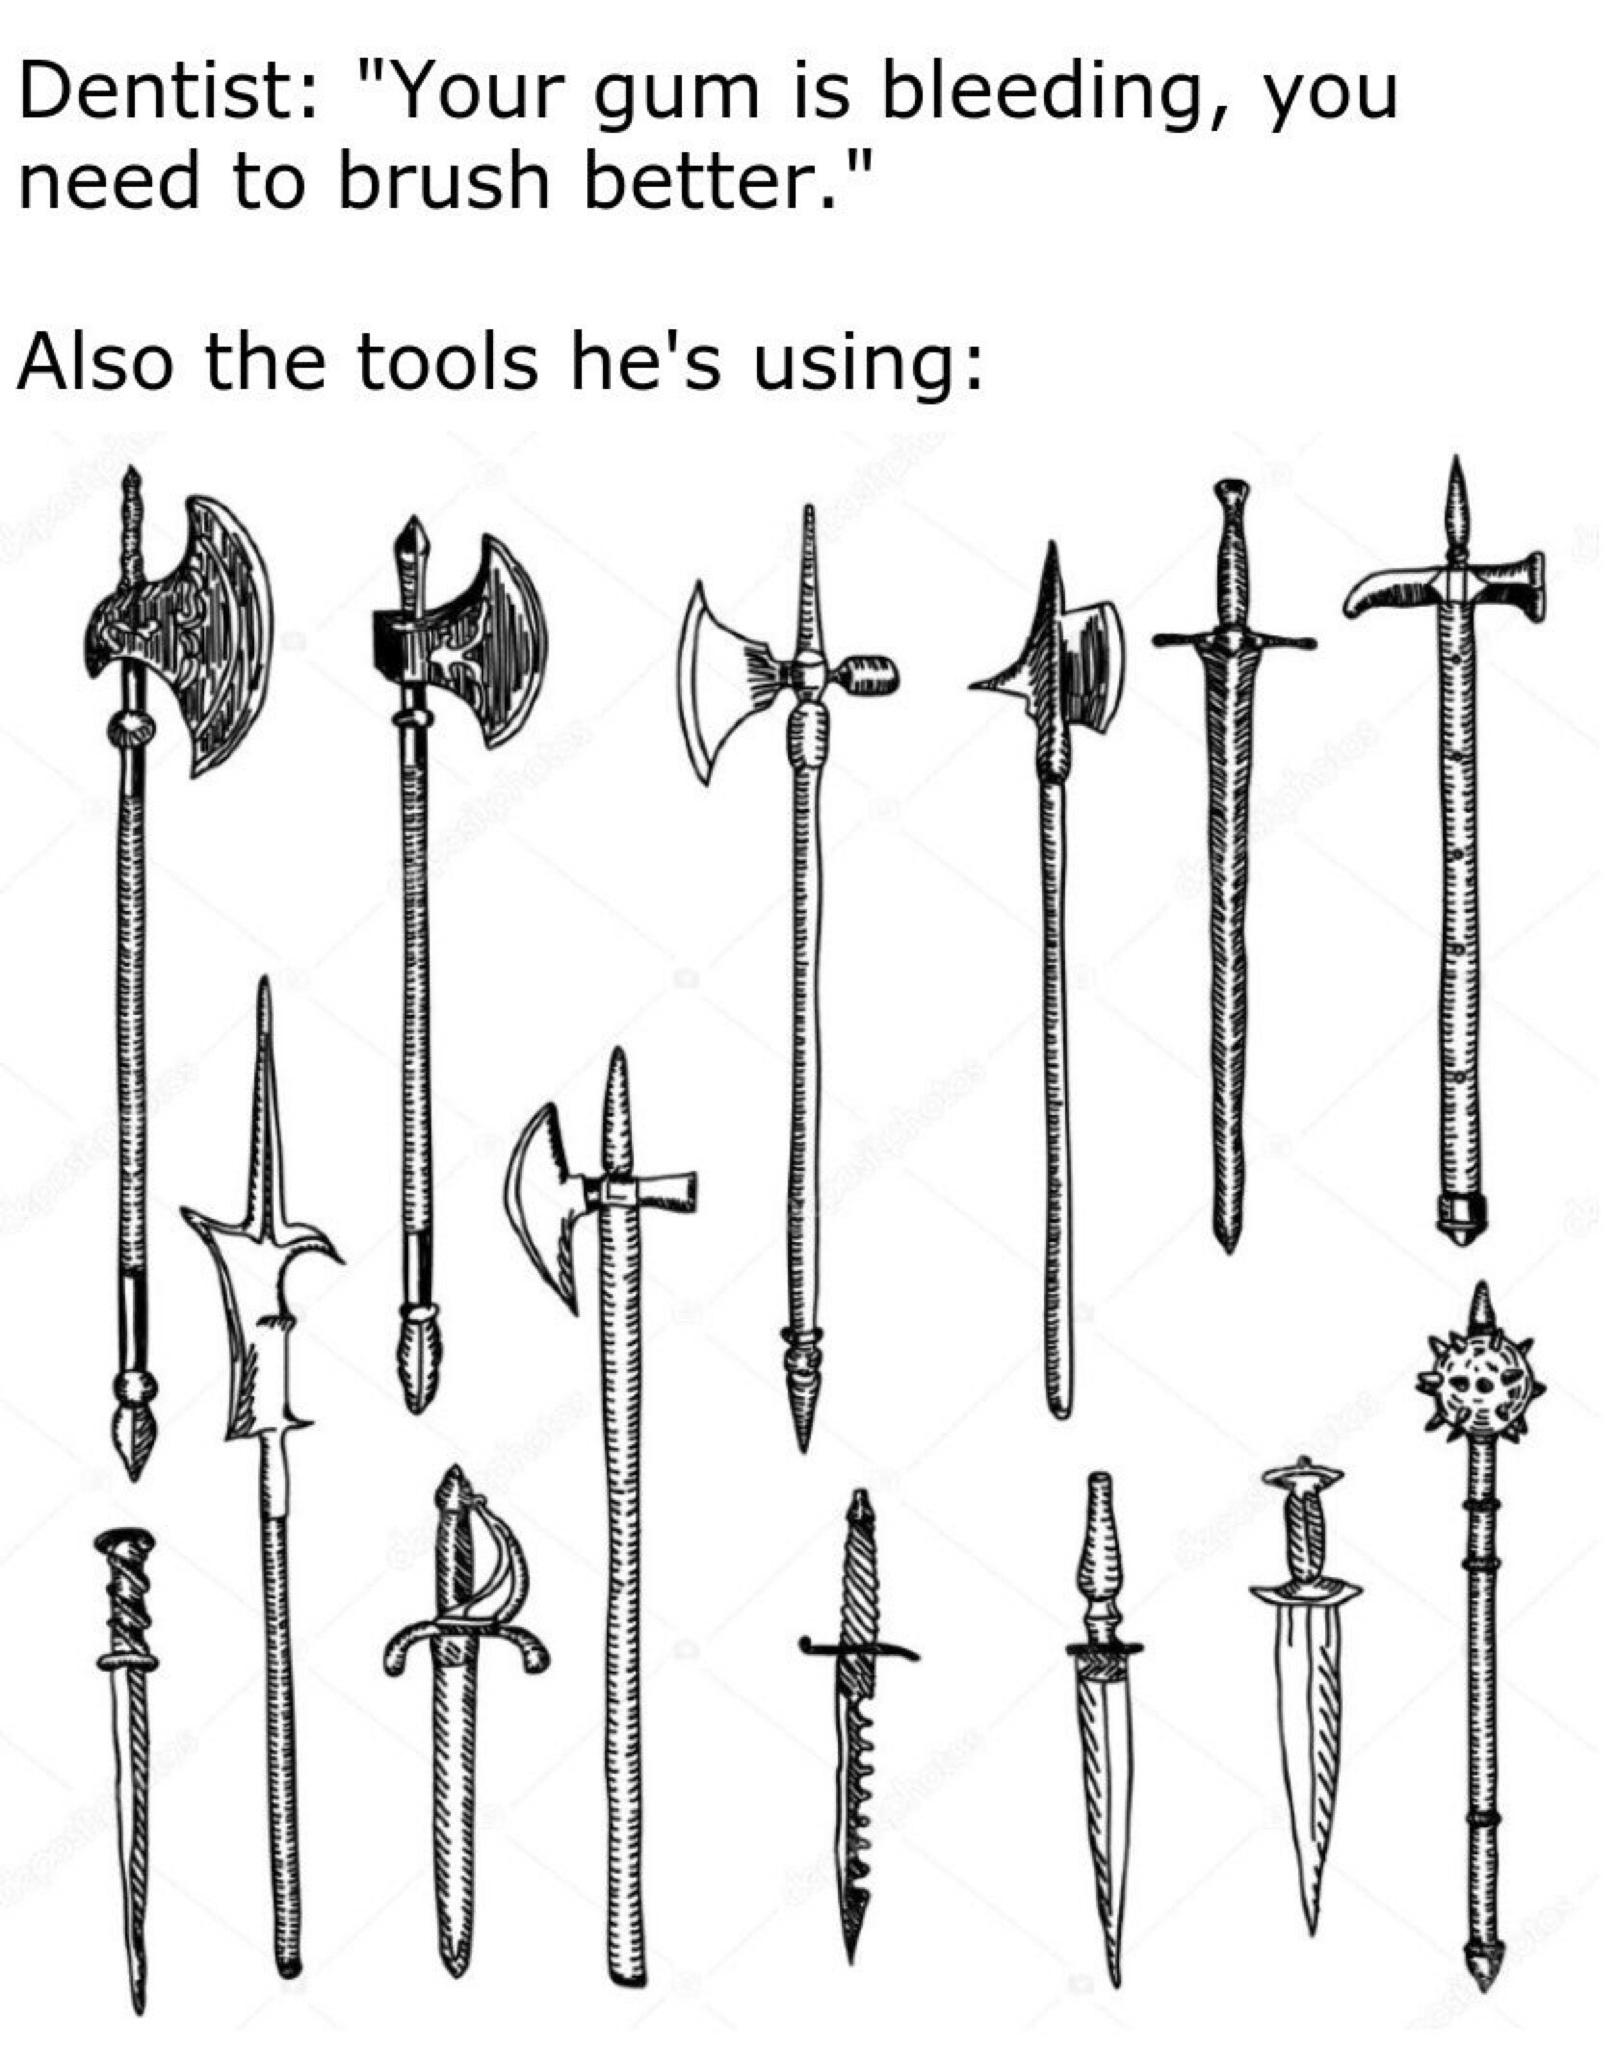 medieval weapons - Dentist "Your gum is bleeding, you need to brush better." Also the tools he's using Crevetti Landini Dar www 10 wamere